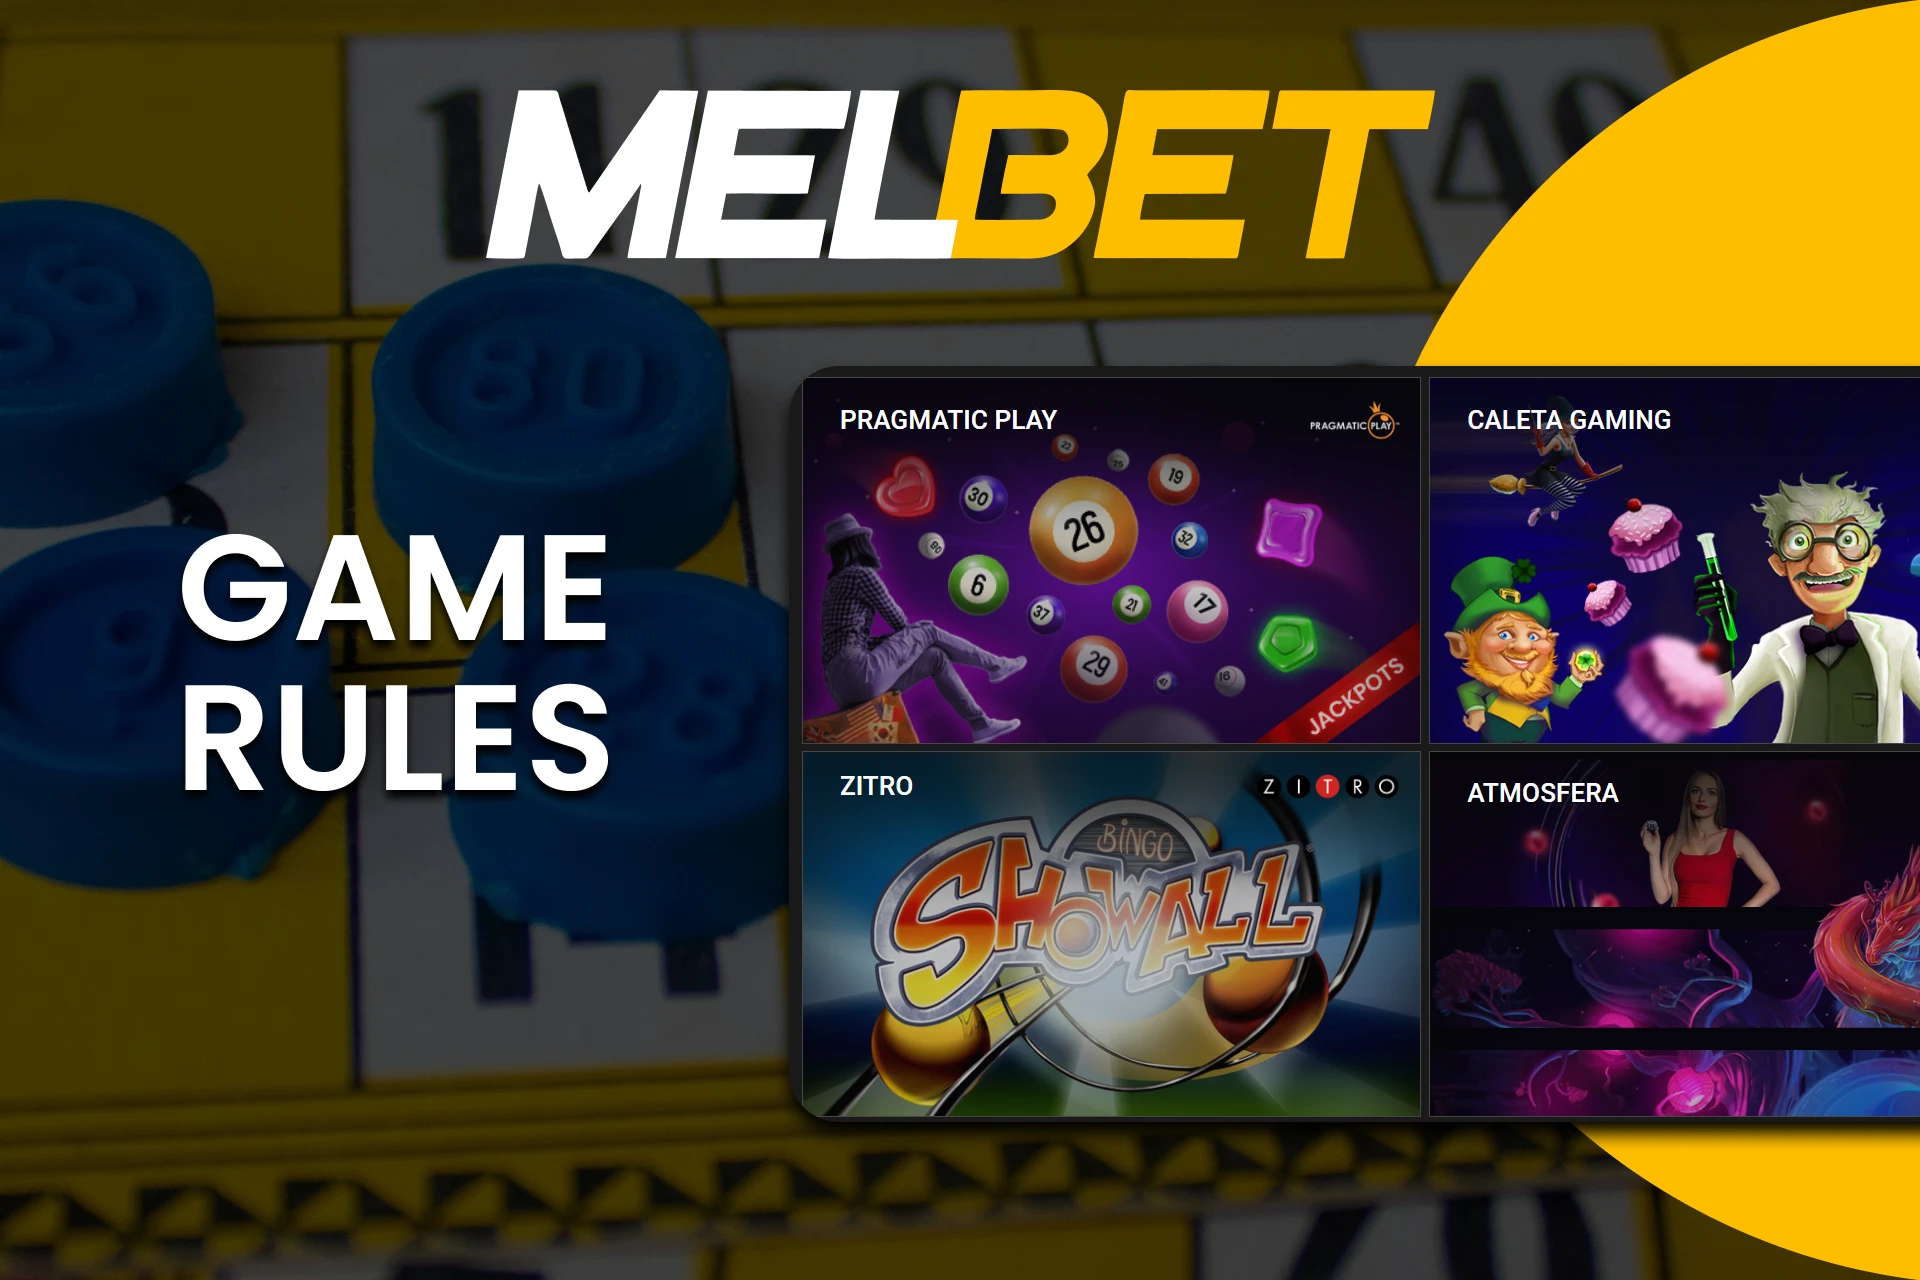 Learn the rules of Bingo at Melbet.